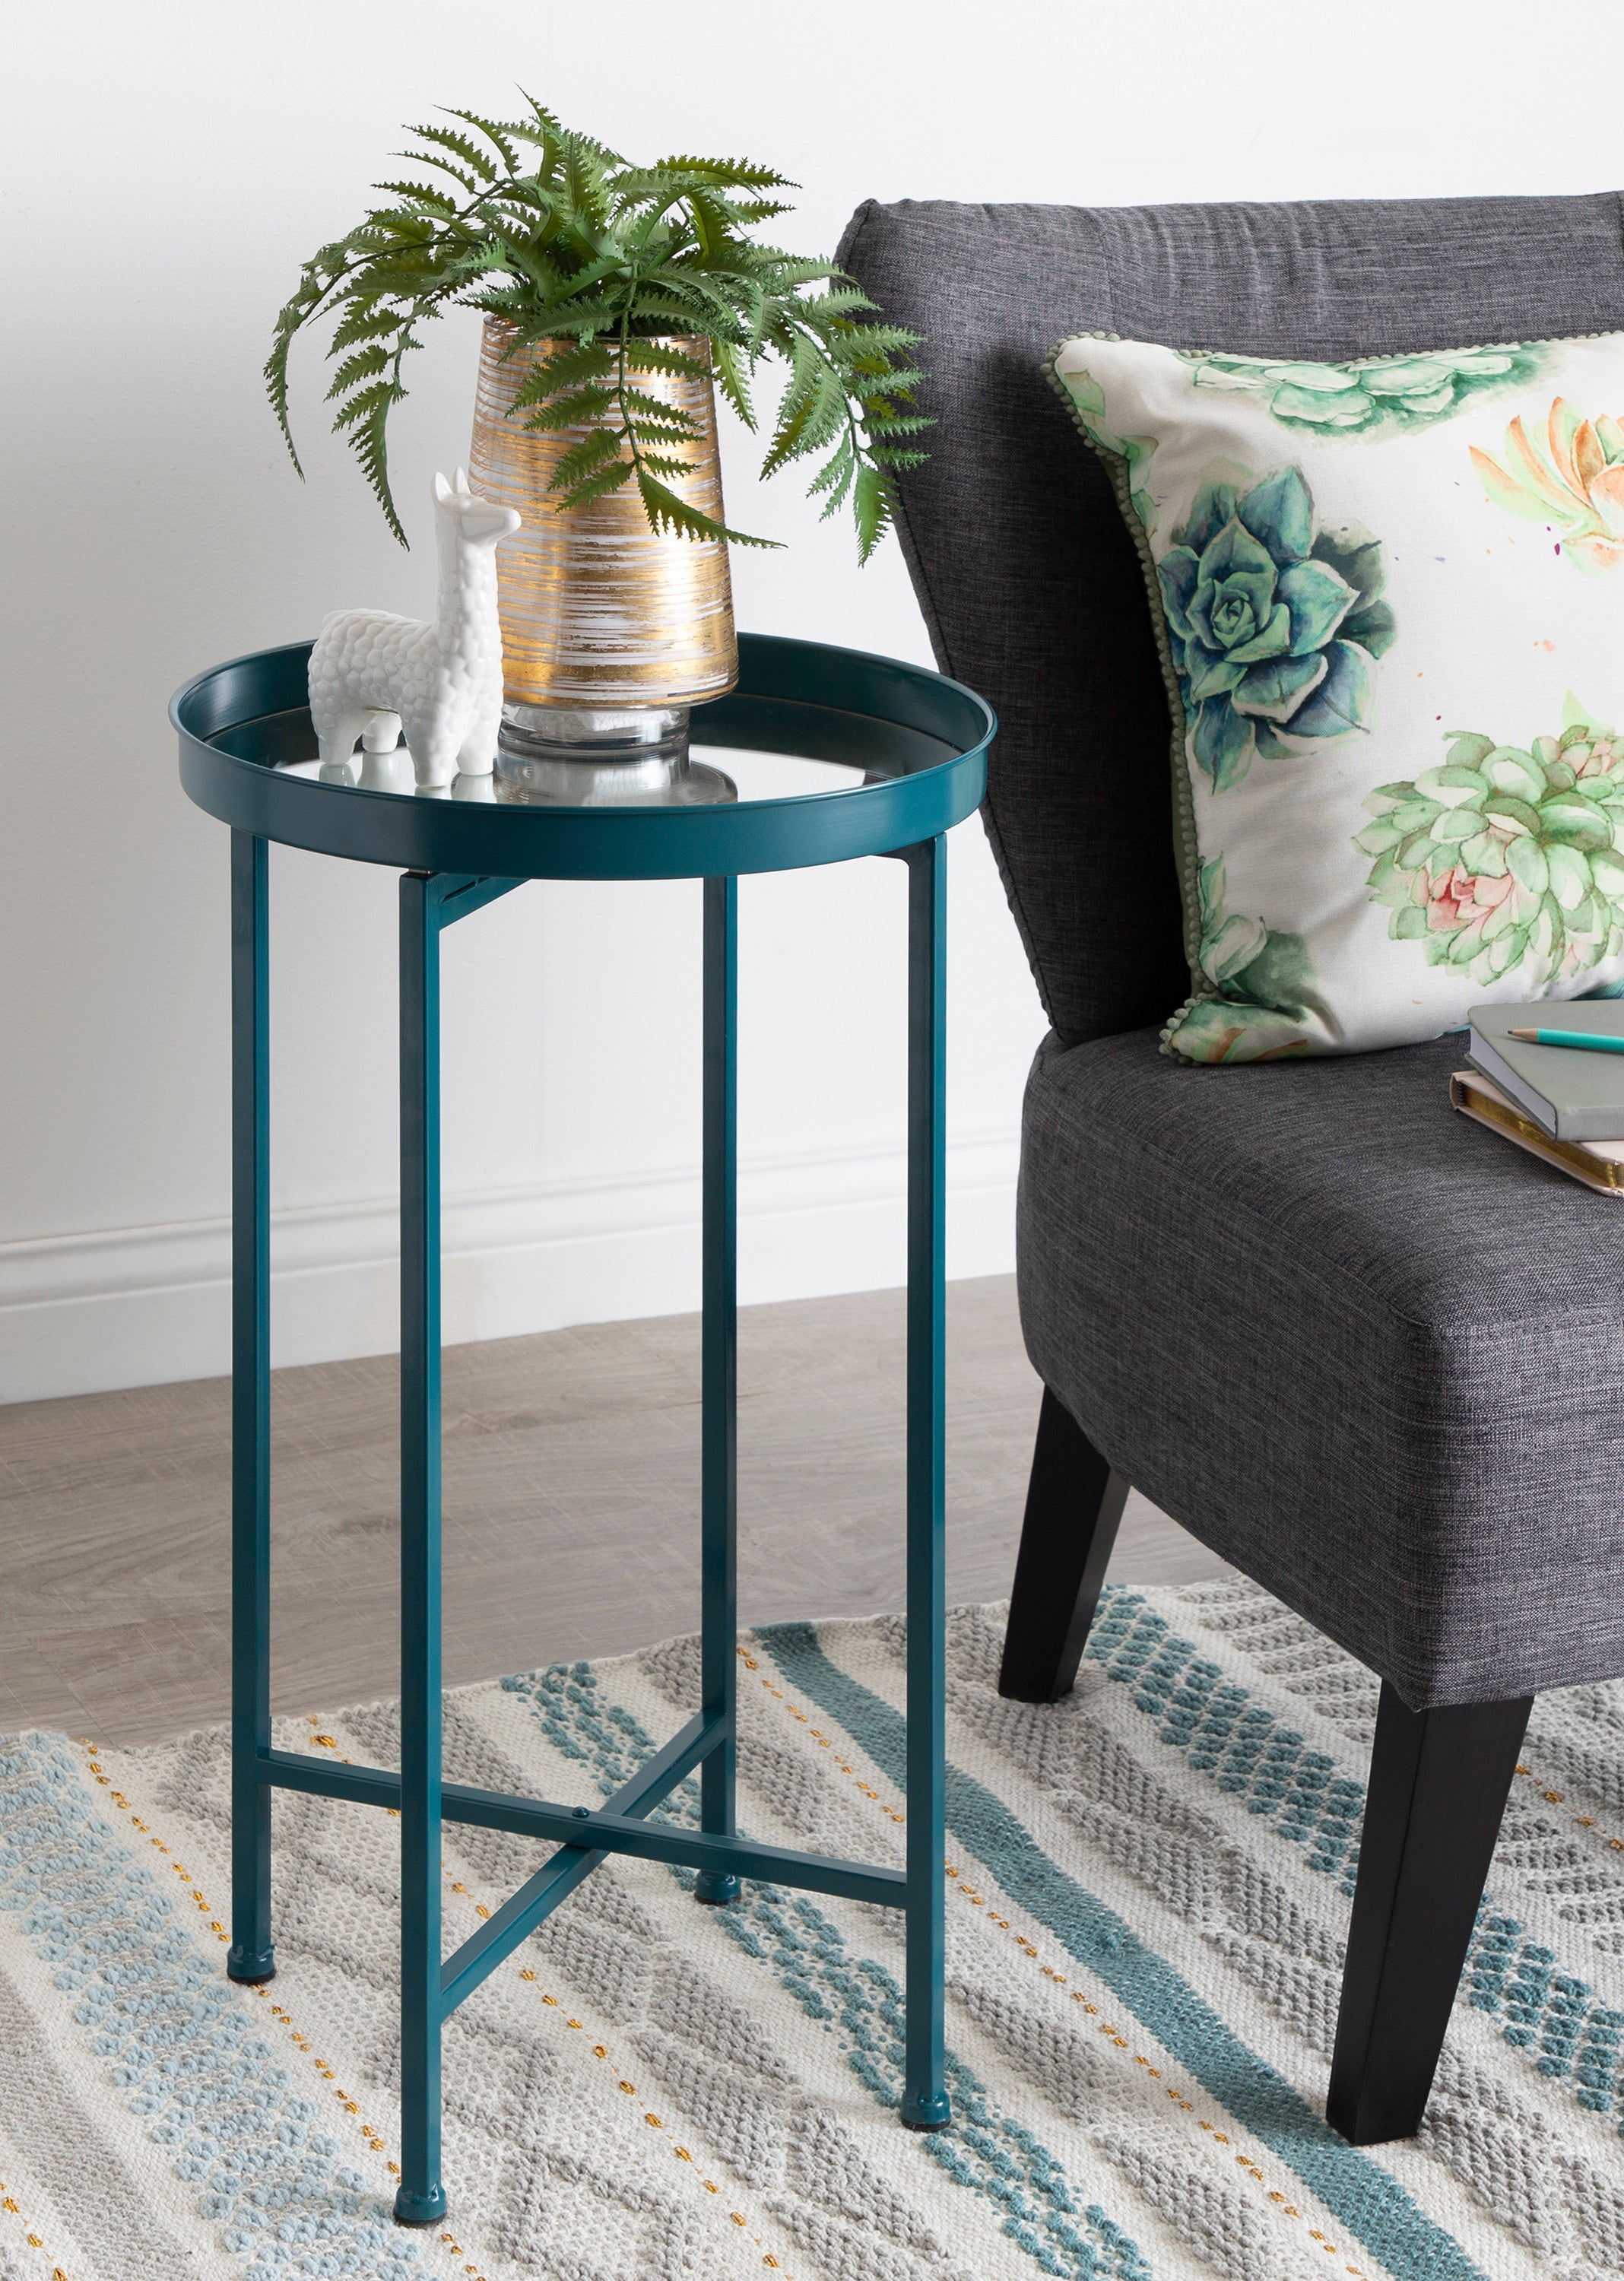 Kate and Laurel Celia Round Metal Foldable Accent Table, 15 x 26